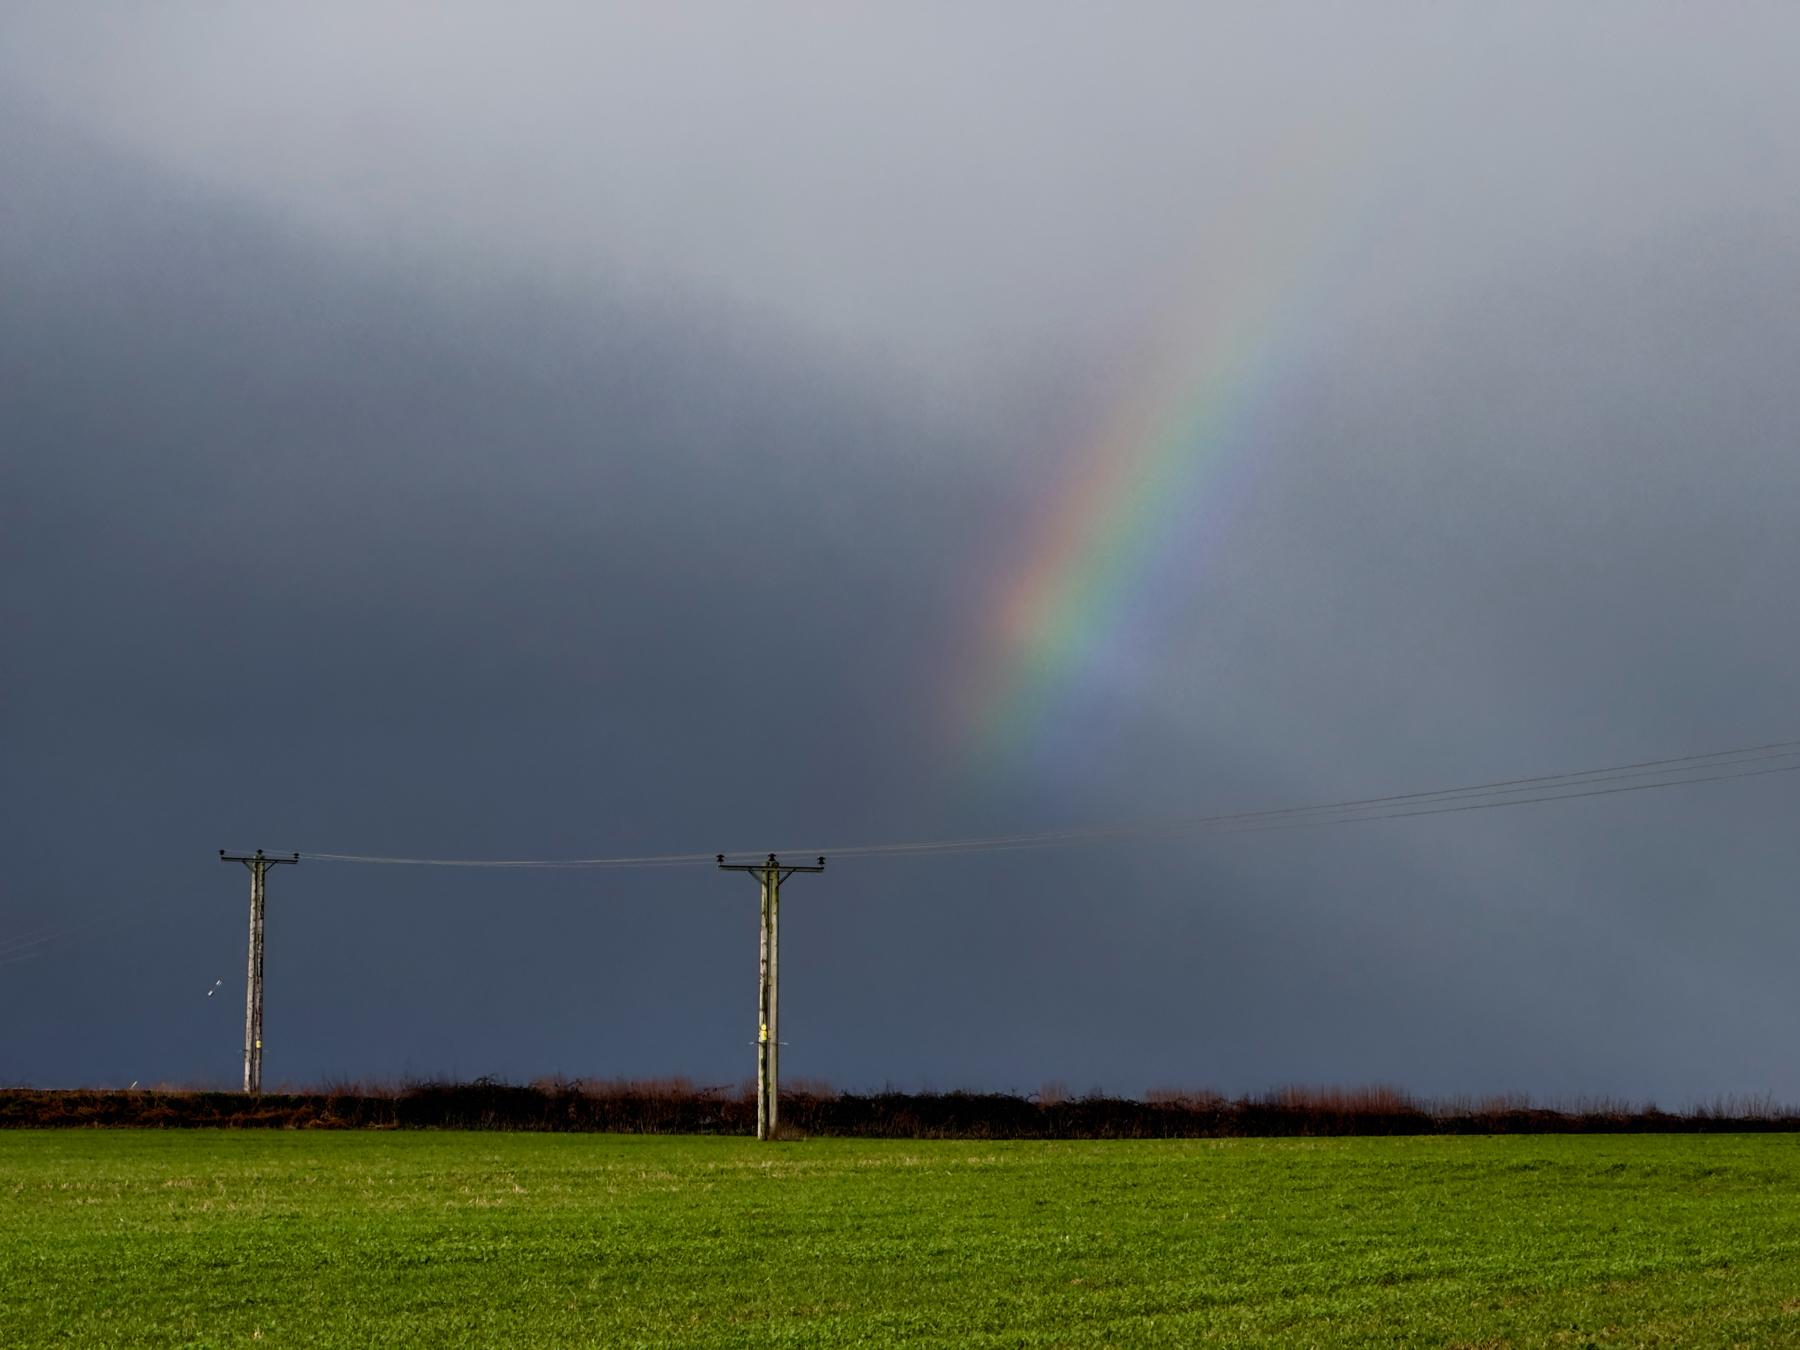 A landscape featuring a green field with two electricity poles and wires, with a partially visible rainbow in a dark cloudy sky.